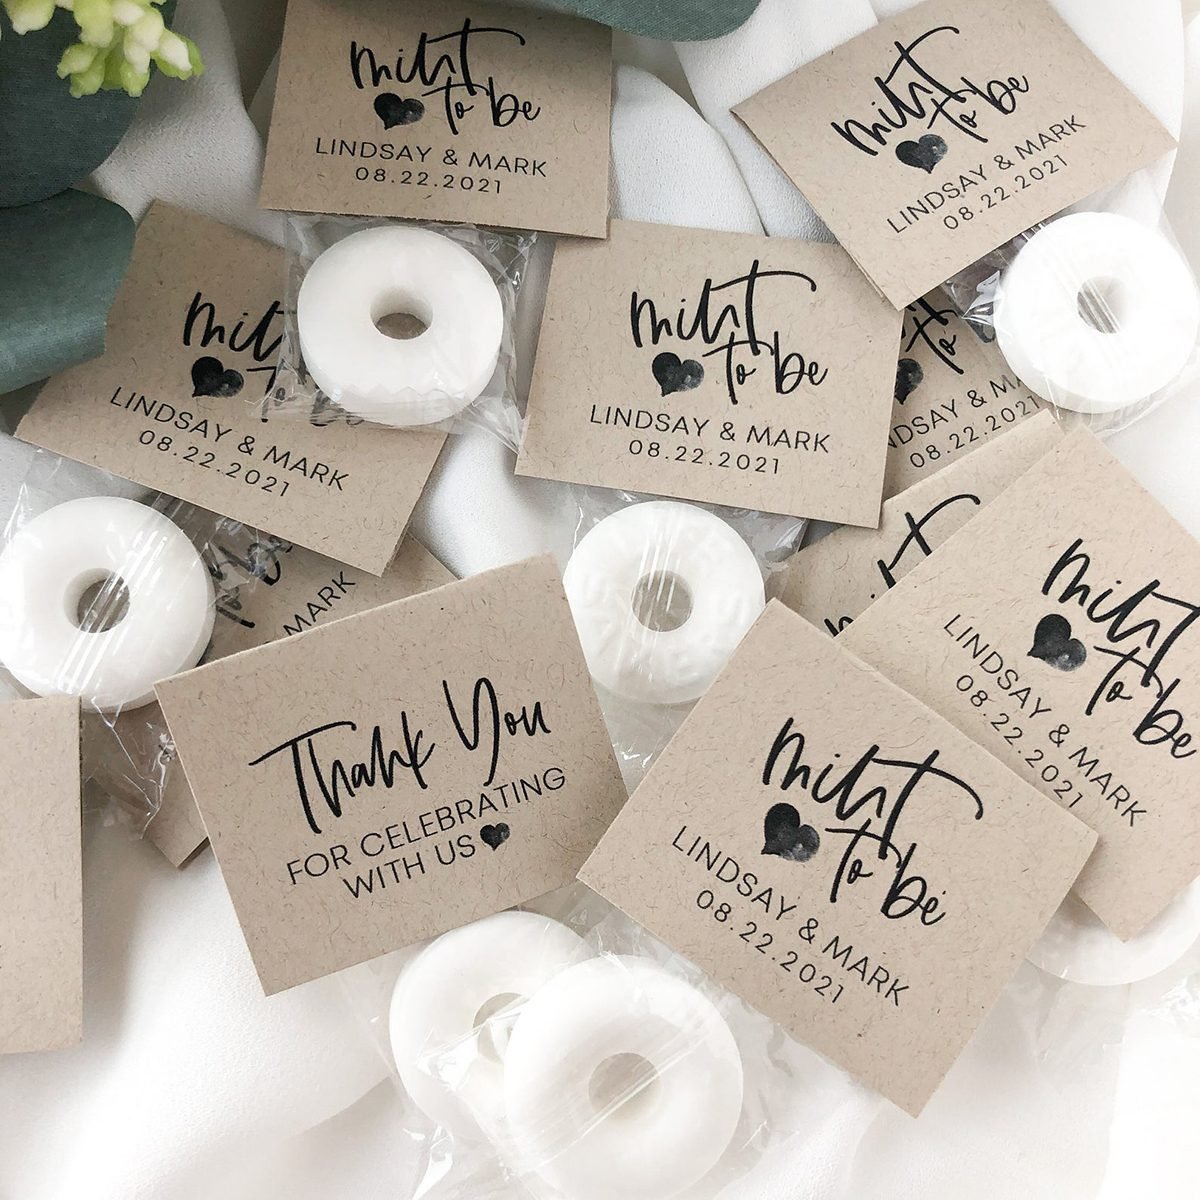 wedding-thank-you-gifts-15-items-your-guests-will-want-to-take-home